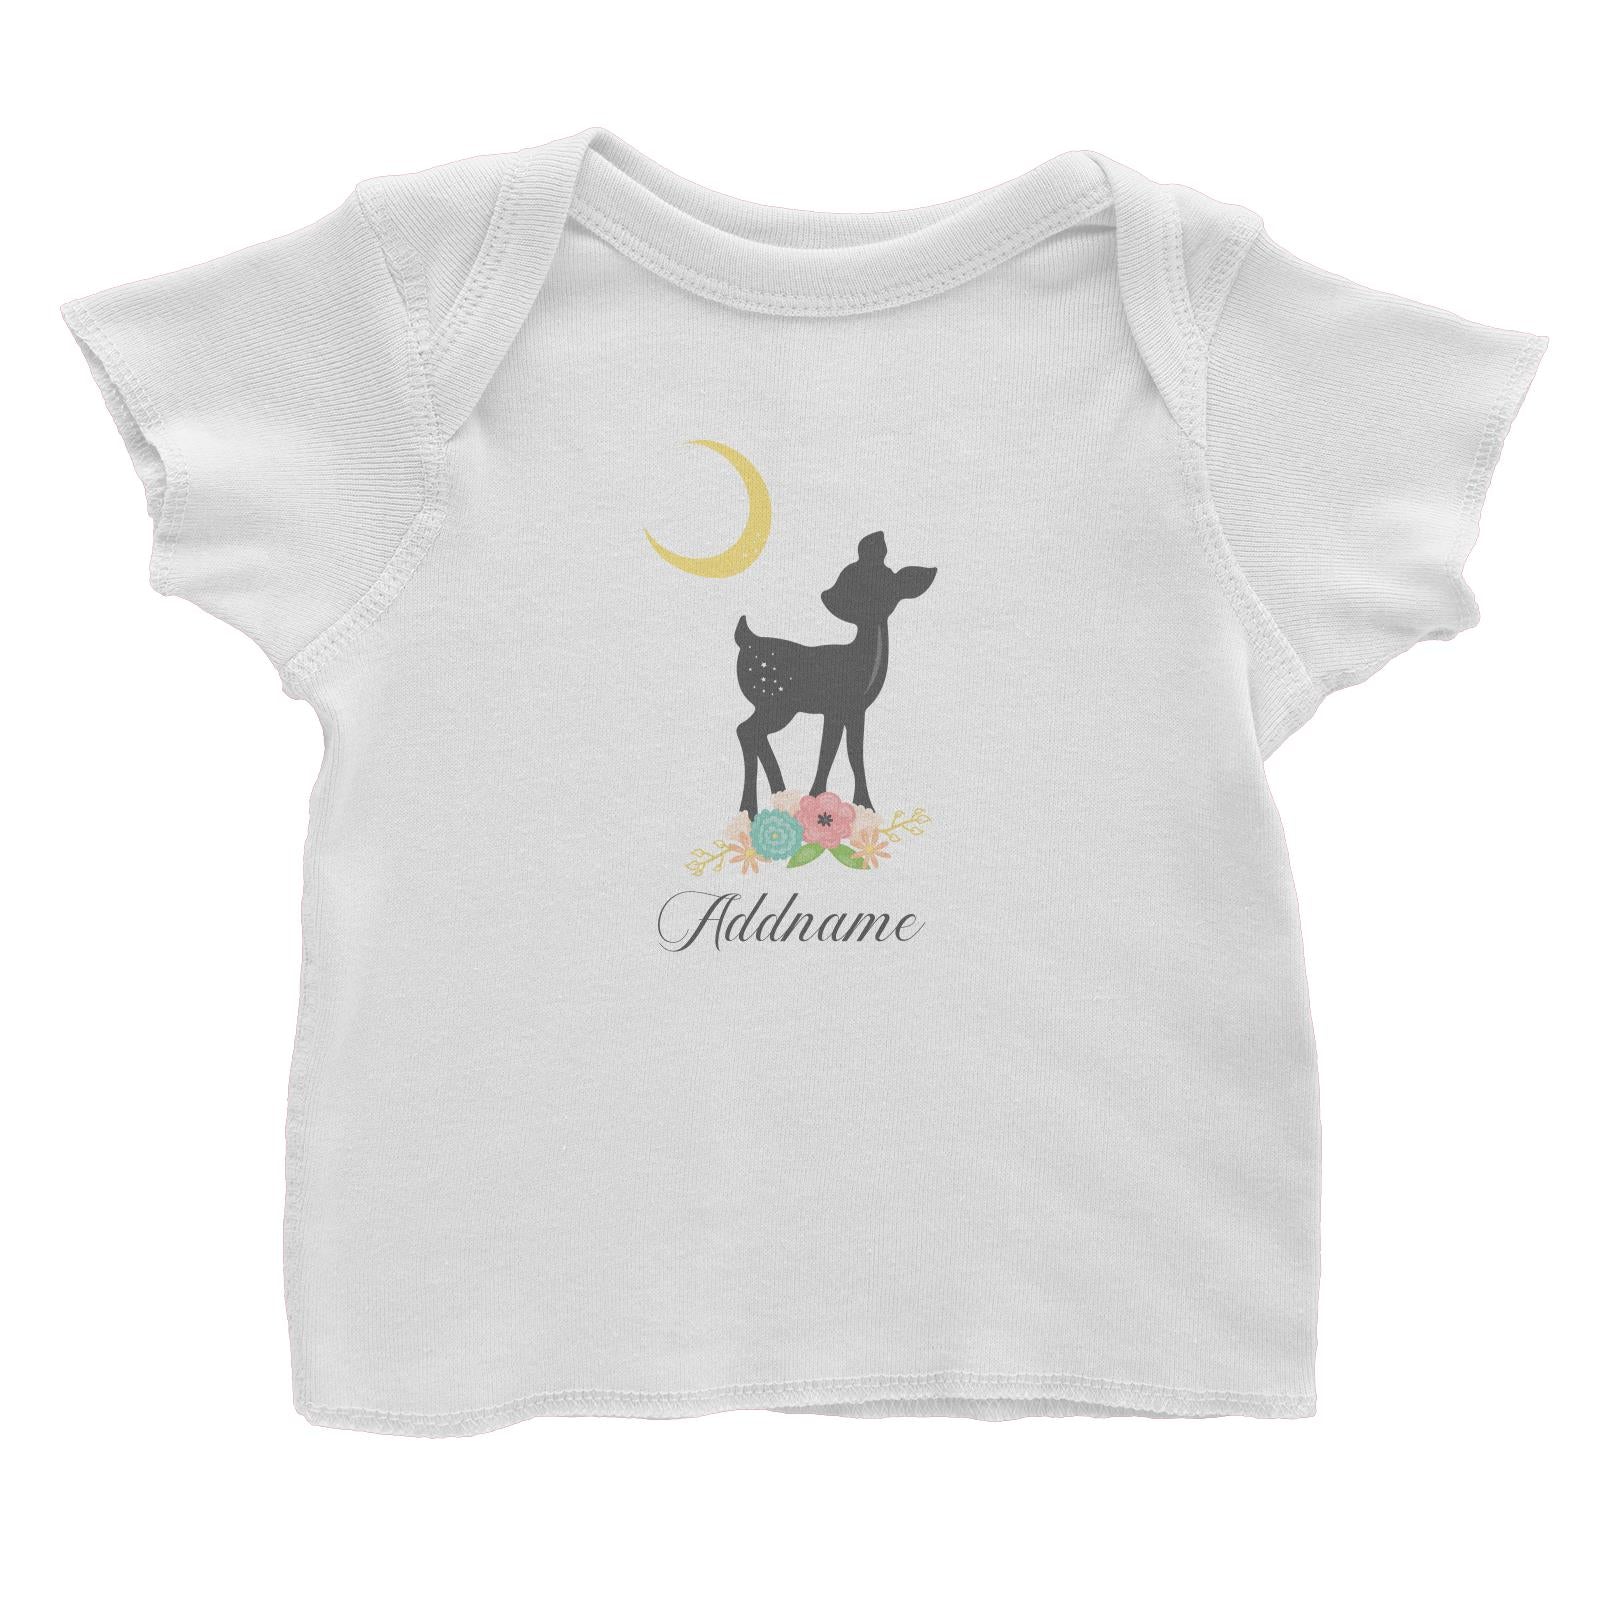 Basic Family Series Pastel Deer Black Fawn With Flower Addname Baby T-Shirt